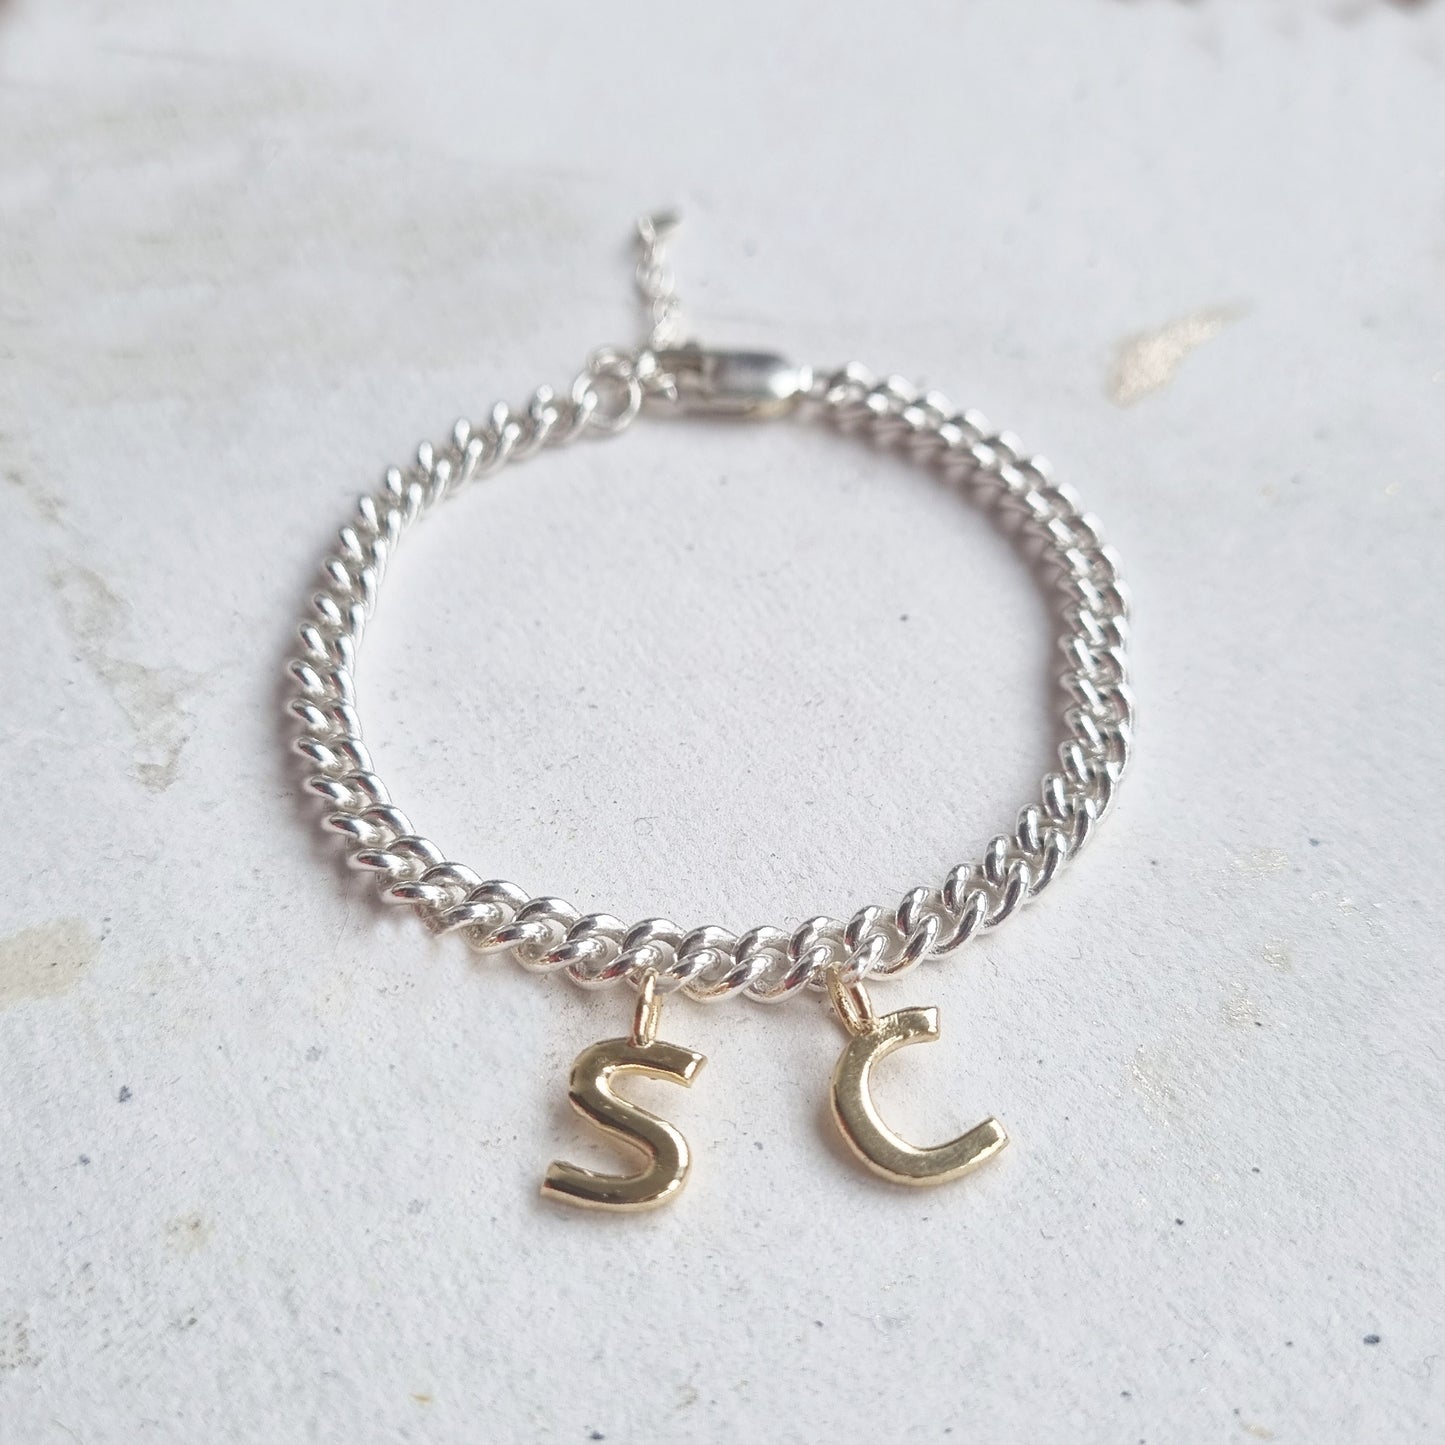 Solid silver bracelet - Two initial charms